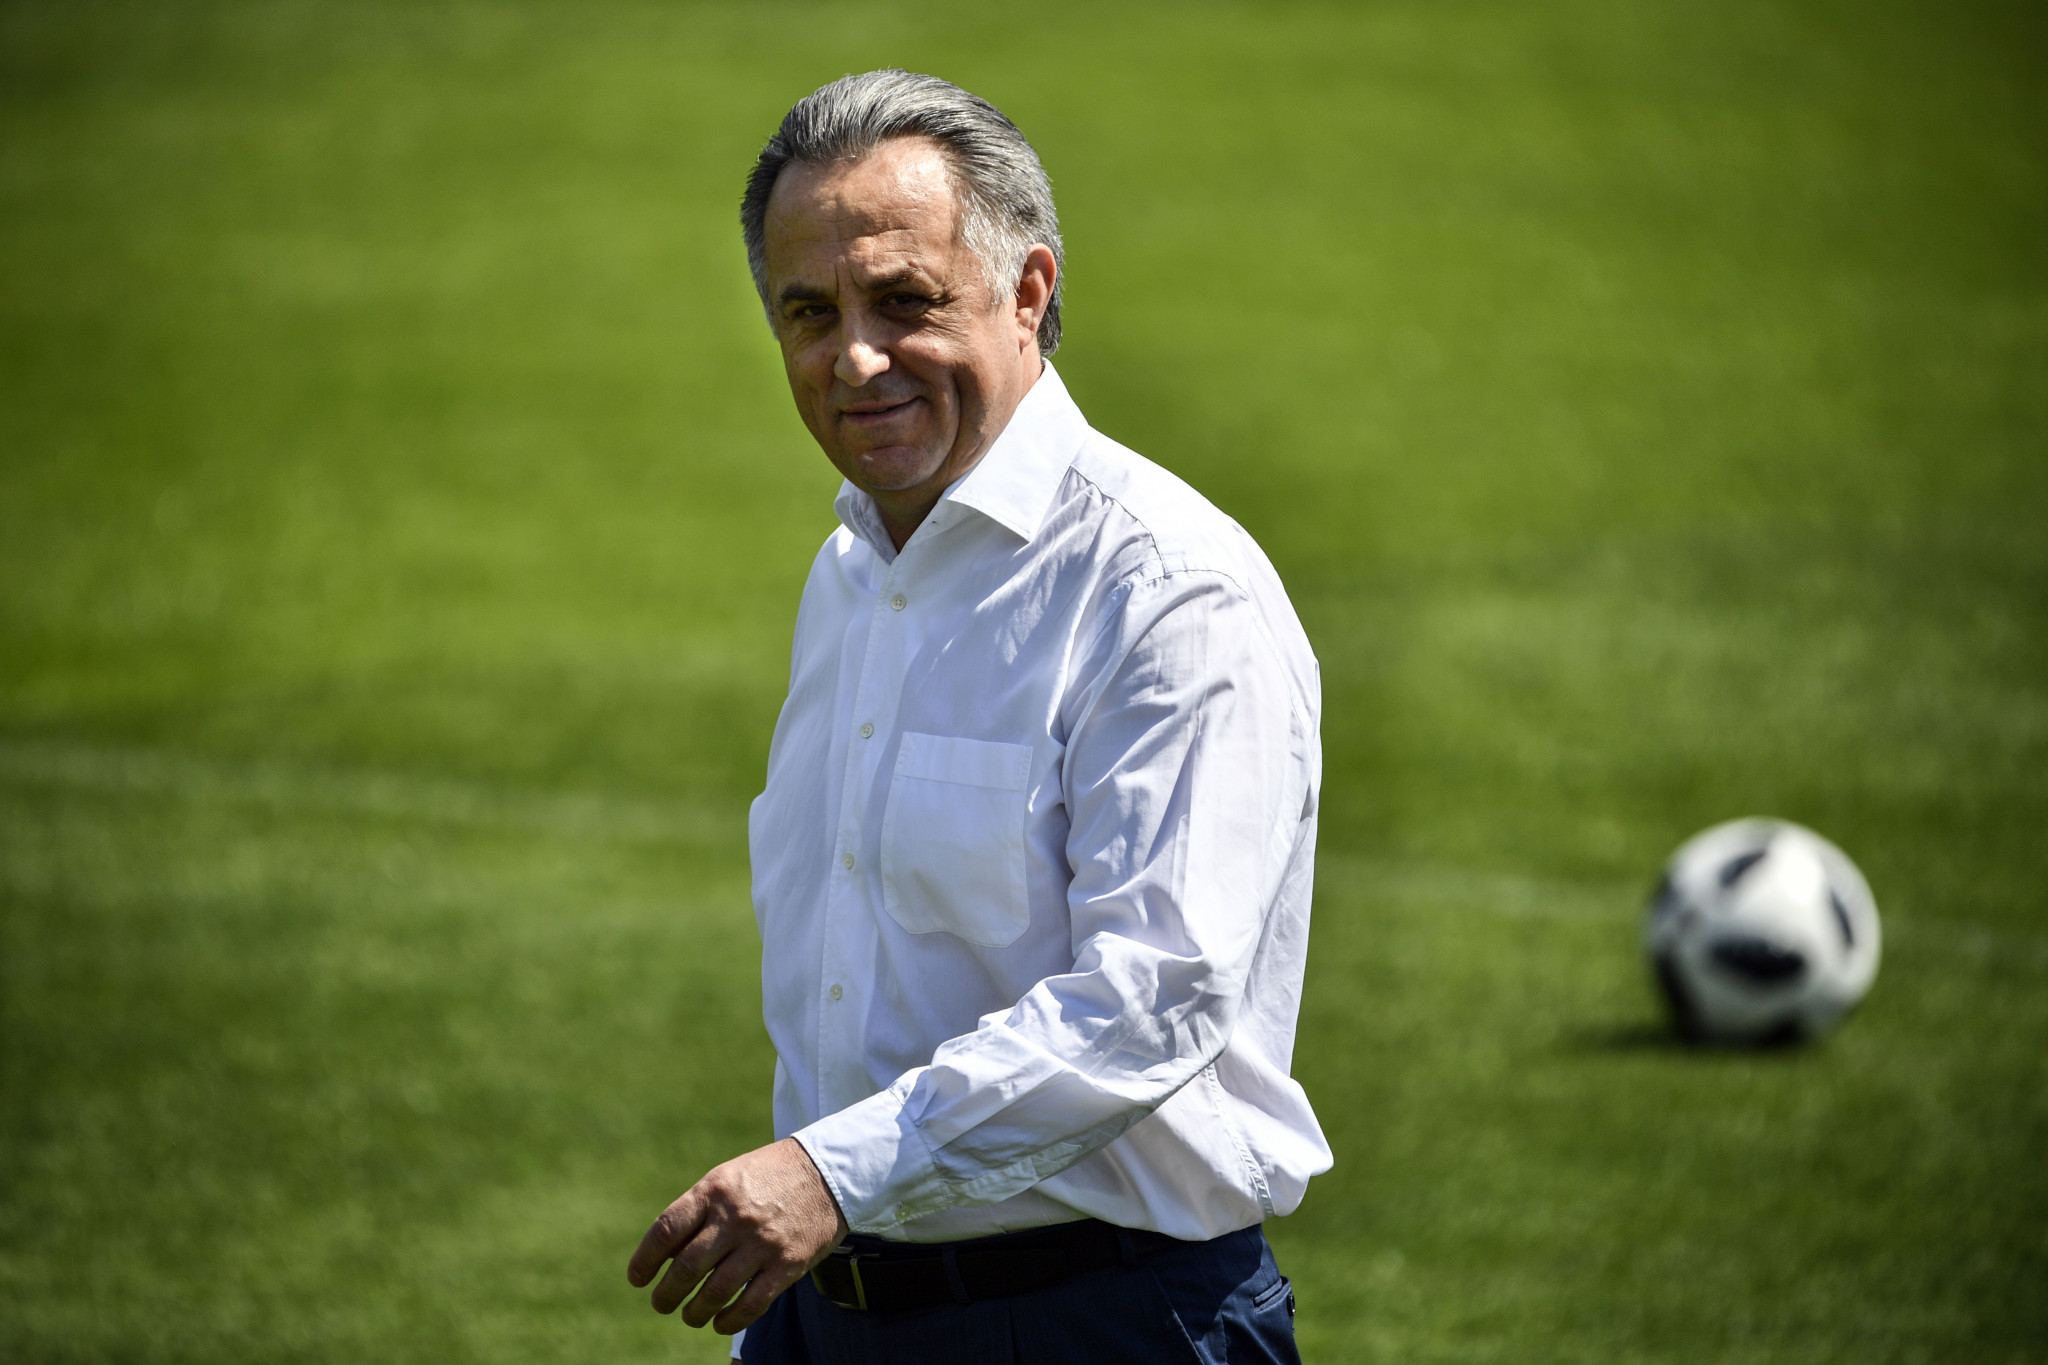 Vitaly Mutko has fully returned to the position of President of the Russian Football Union ©Getty Images